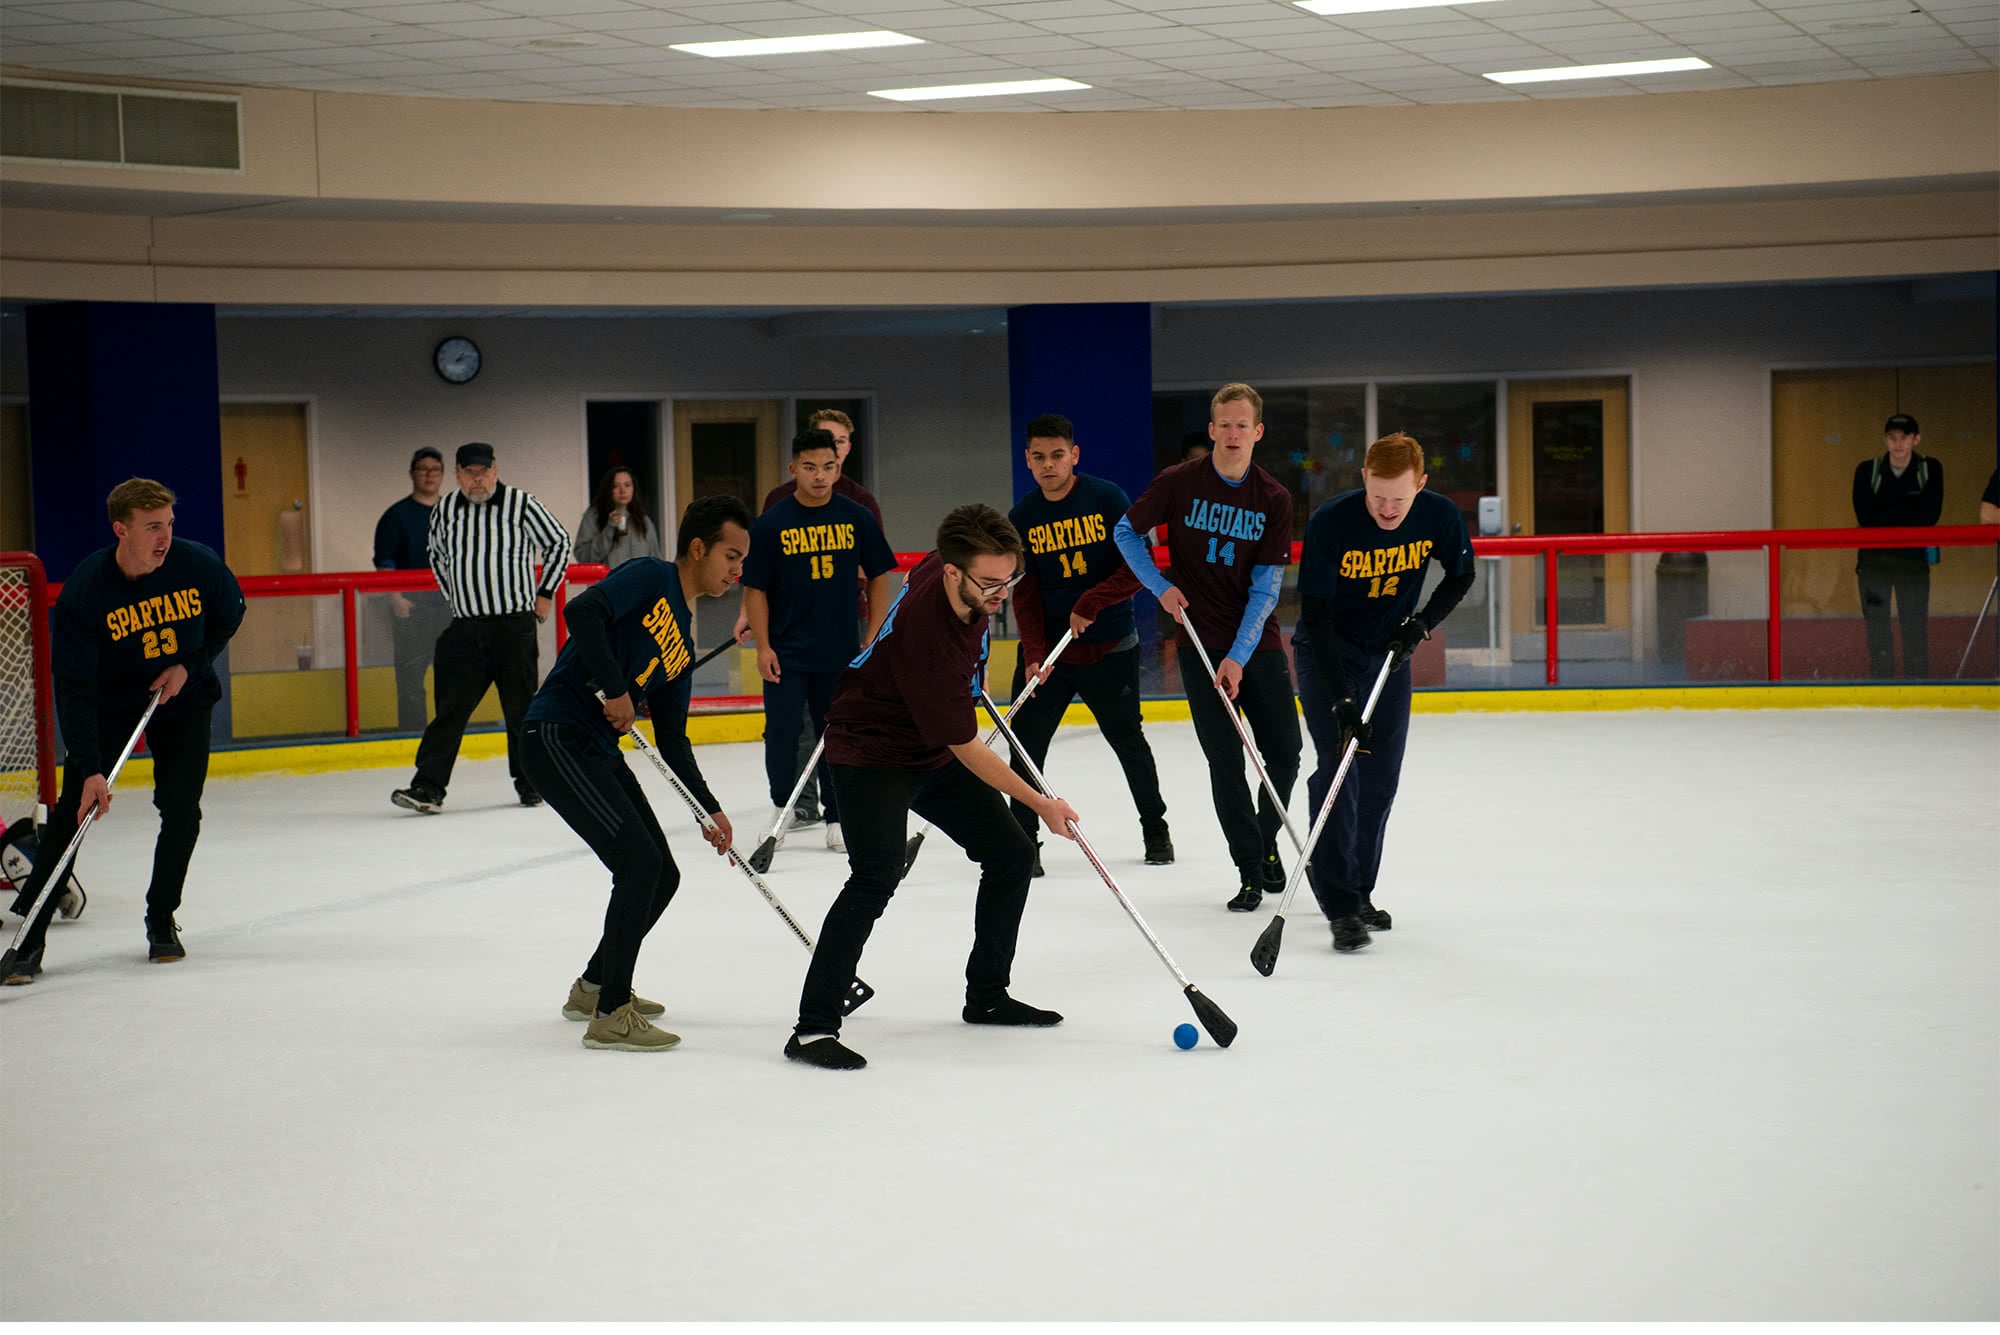 Men's collegian broom hockey players trying to steal the puck.  